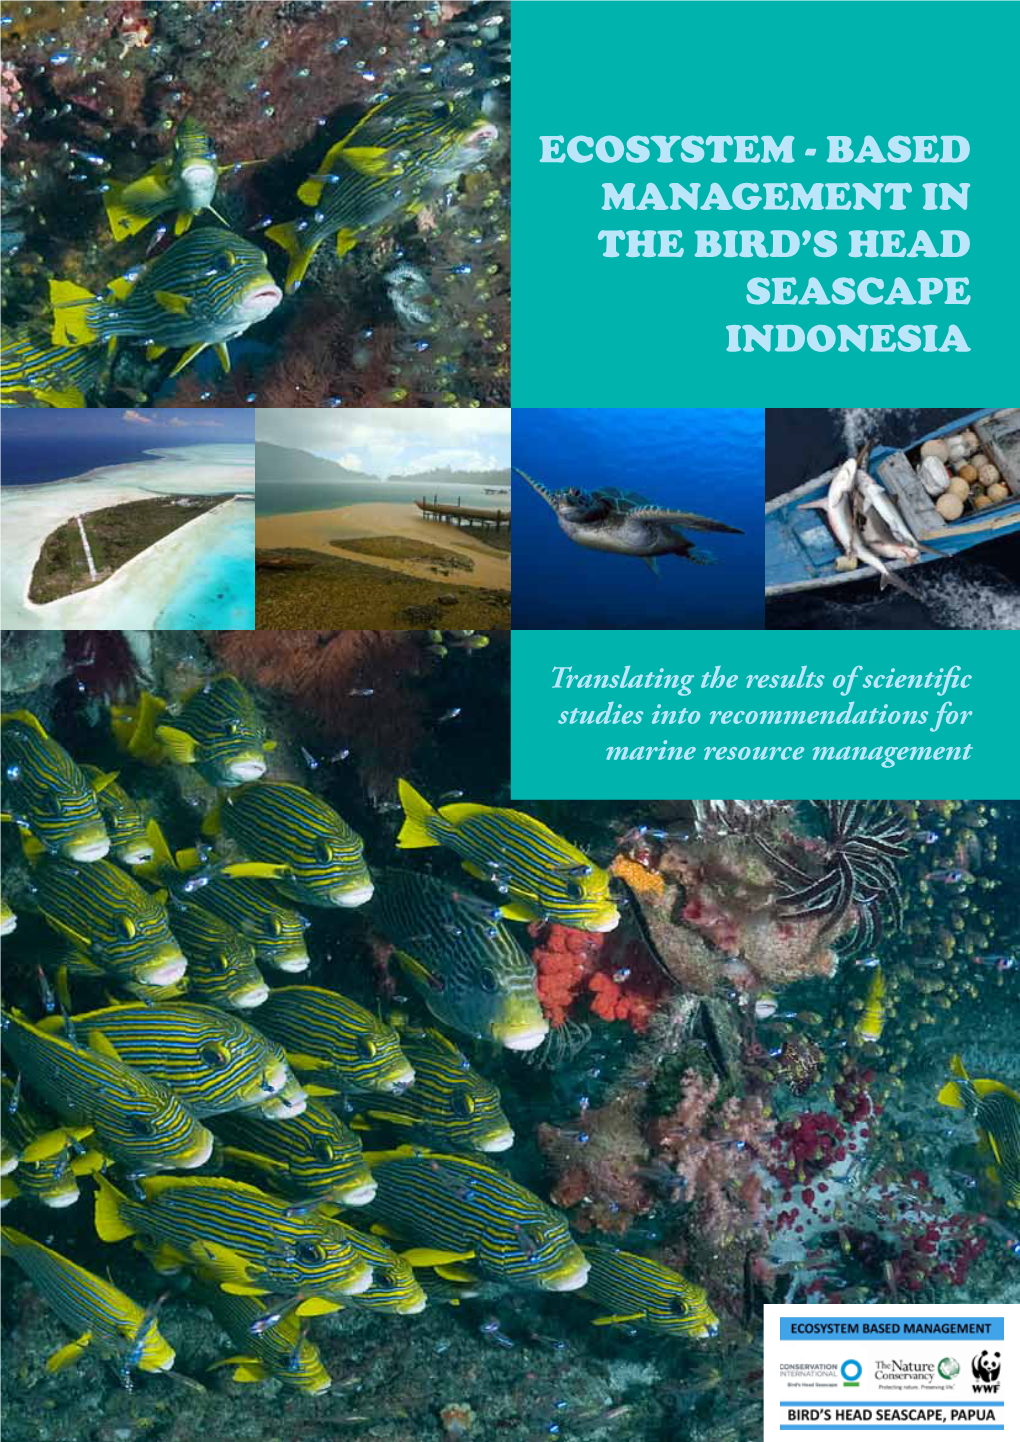 Ecosystem-Based Management in the Bird's Head Seascape, Indonesia